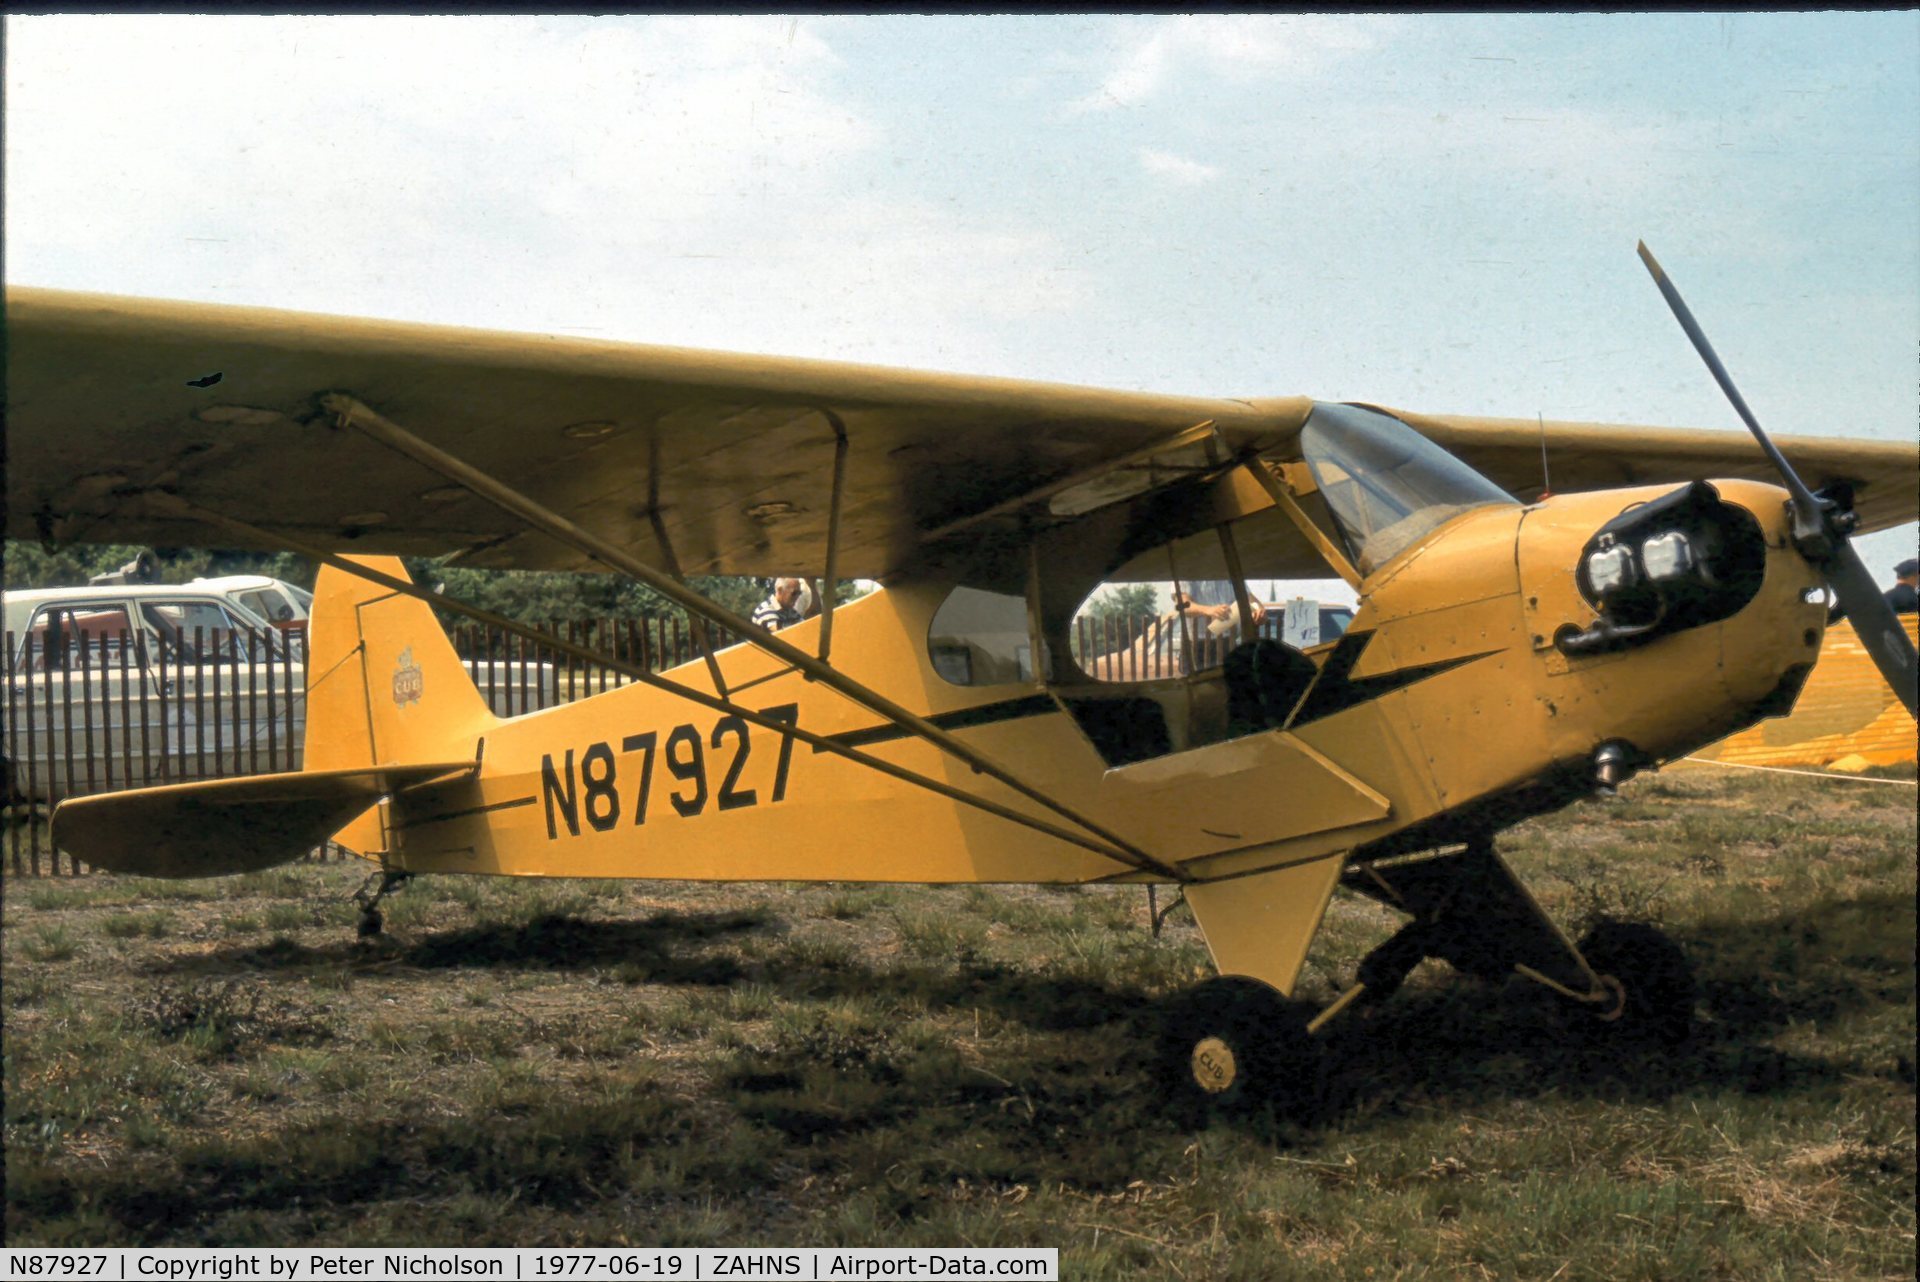 N87927, 1946 Piper J3C-65 Cub Cub C/N 15545, Seen at Zahns Airport, Amityville, NY in 1977 - airfield later closed in 1980. Good to see this Cub still active in 2008.